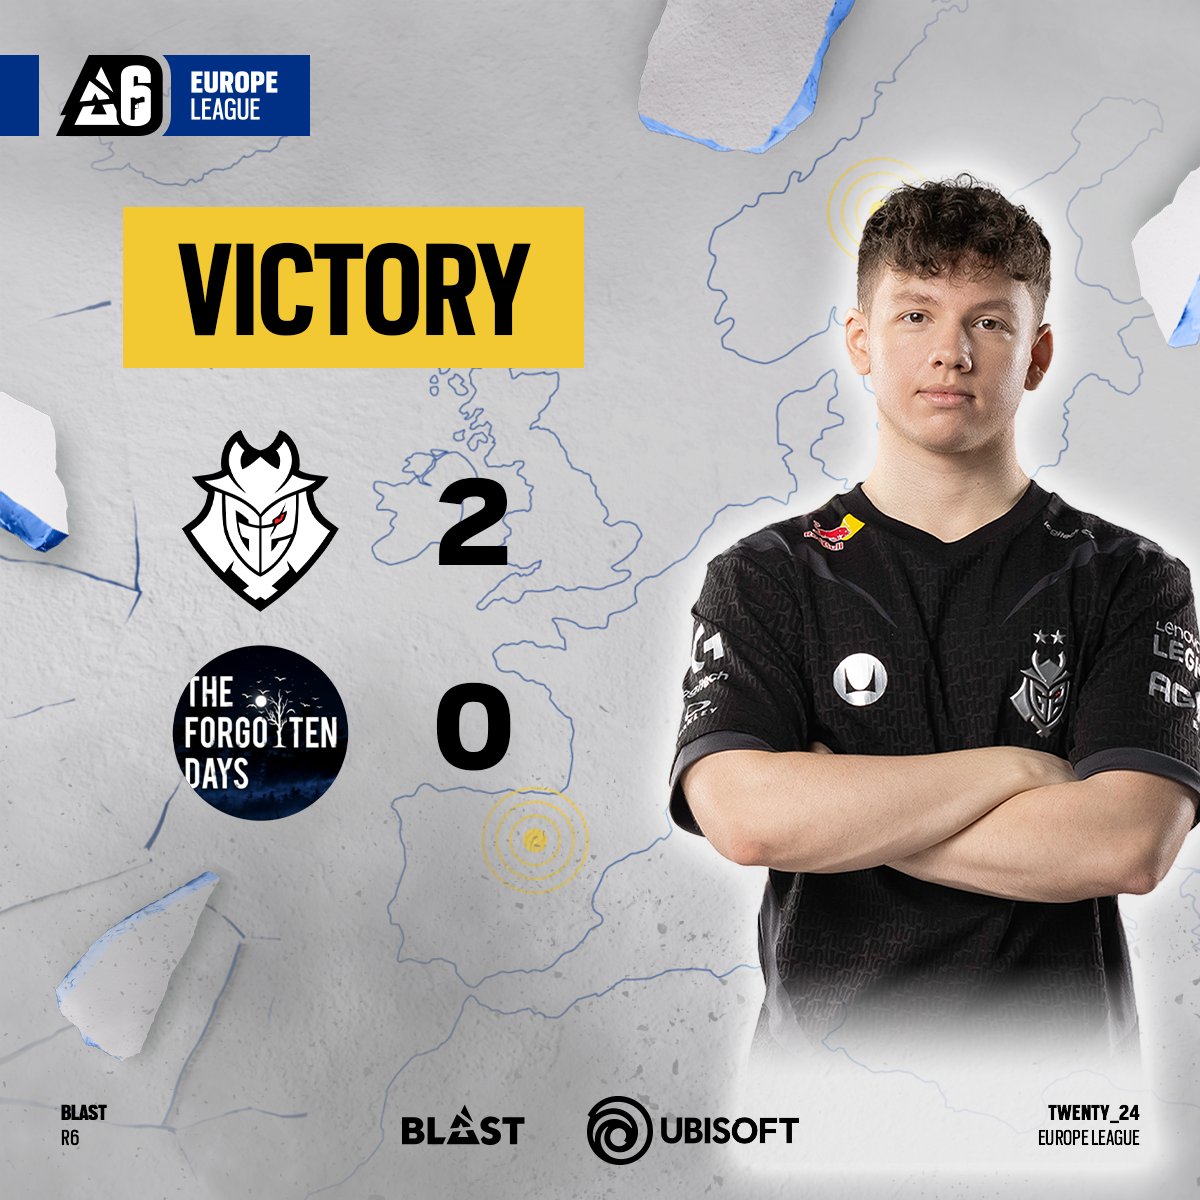 The Forgotten Days fought well but @G2esports takes the W ‼️

LCQ Finalists confirmed ✅ #R6EUL